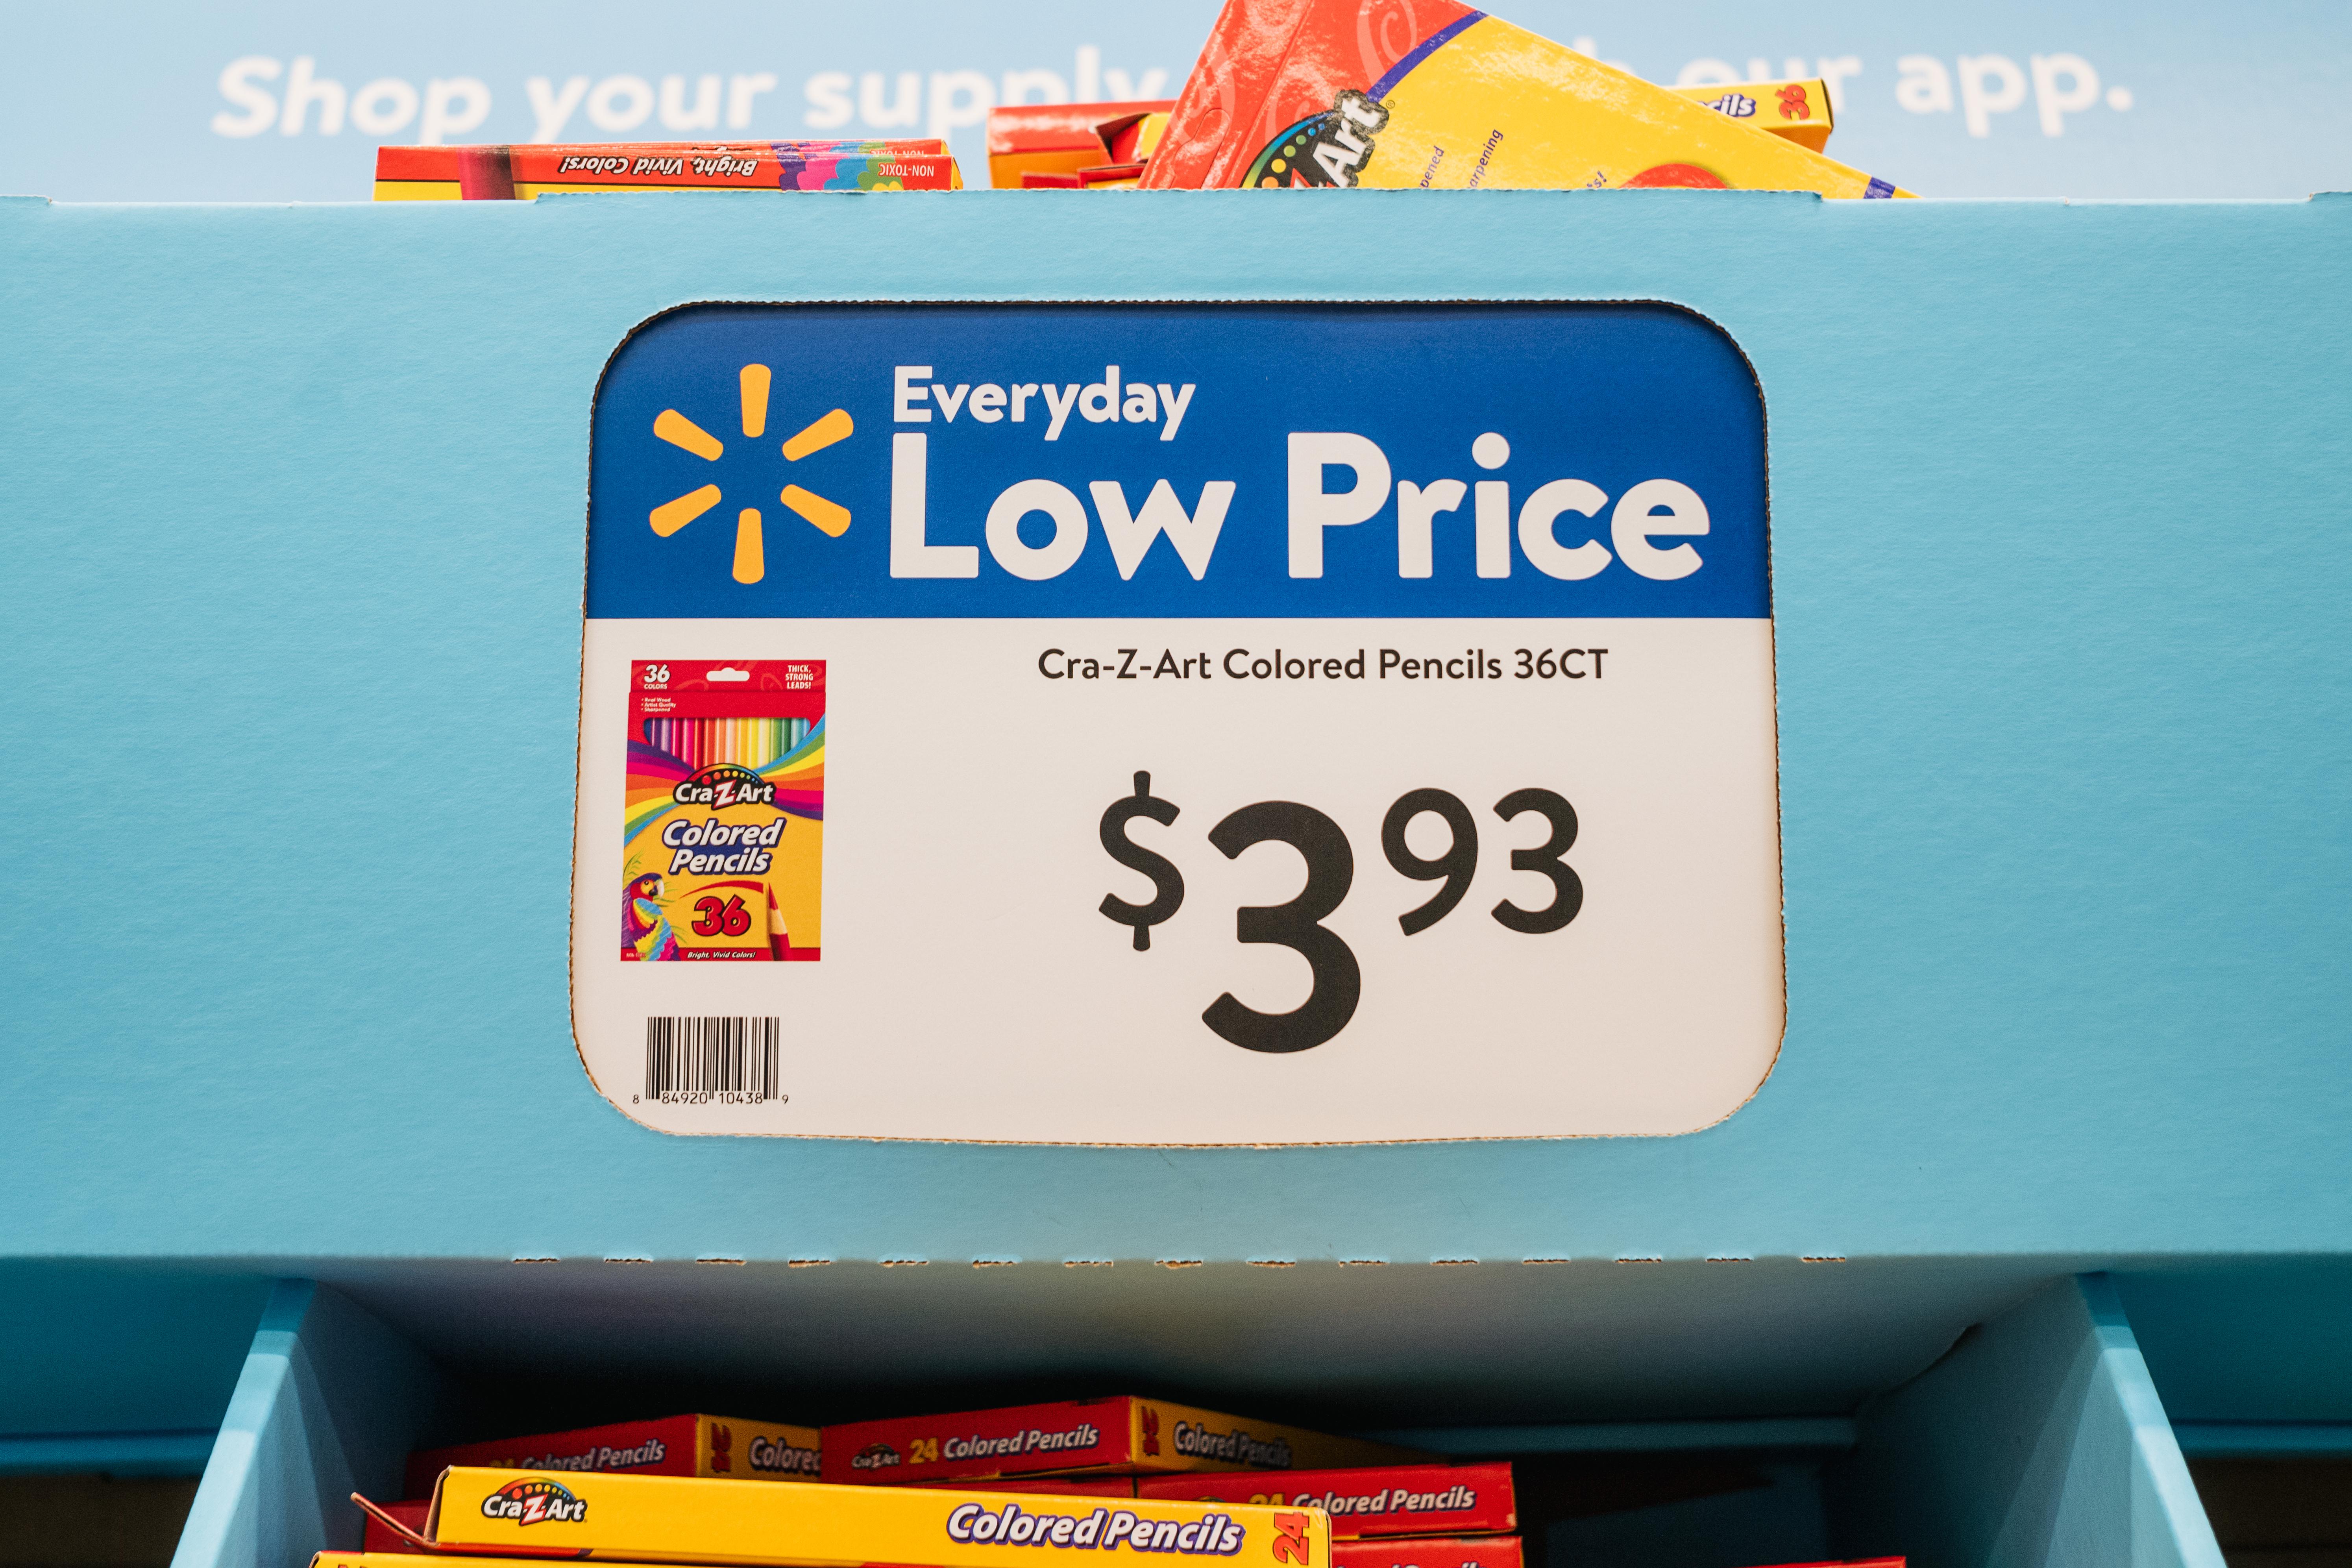 HOUSTON, TEXAS - AUGUST 04: A price-tag is shown at a Walmart store on August 04, 2021 in Houston, Texas. The cost of back-to-school items is on the rise due to a combination of delays in U.S. manufacturing and heightened consumer demand for goods. The steep increases are partially due to both elementary and college-aged students returning back to school after missing in-person class sessions during the pandemic.  (Photo by Brandon Bell/Getty Images)